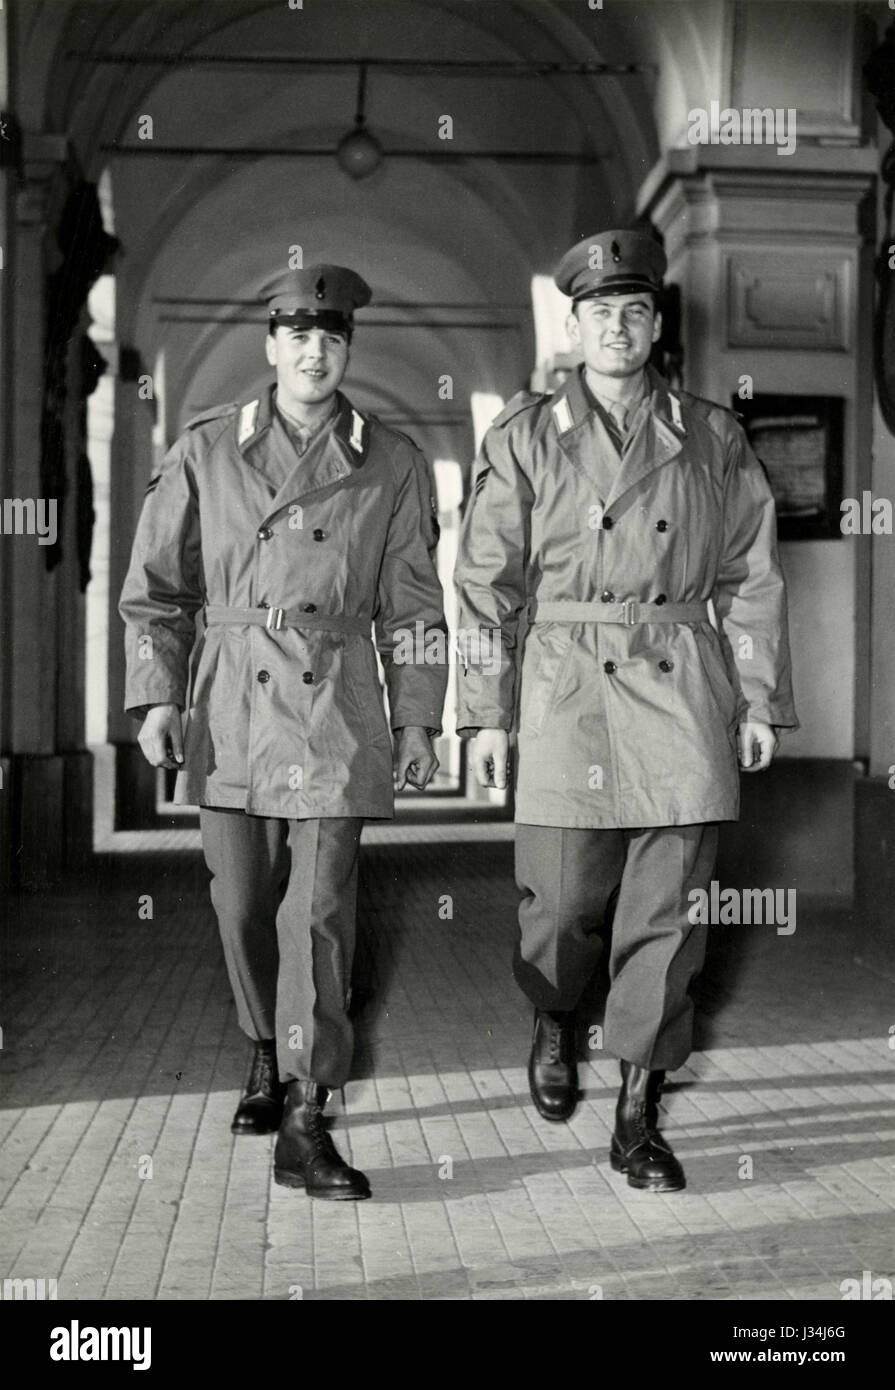 New uniforms for the Italian Republican Army, Italy 1957 Stock Photo